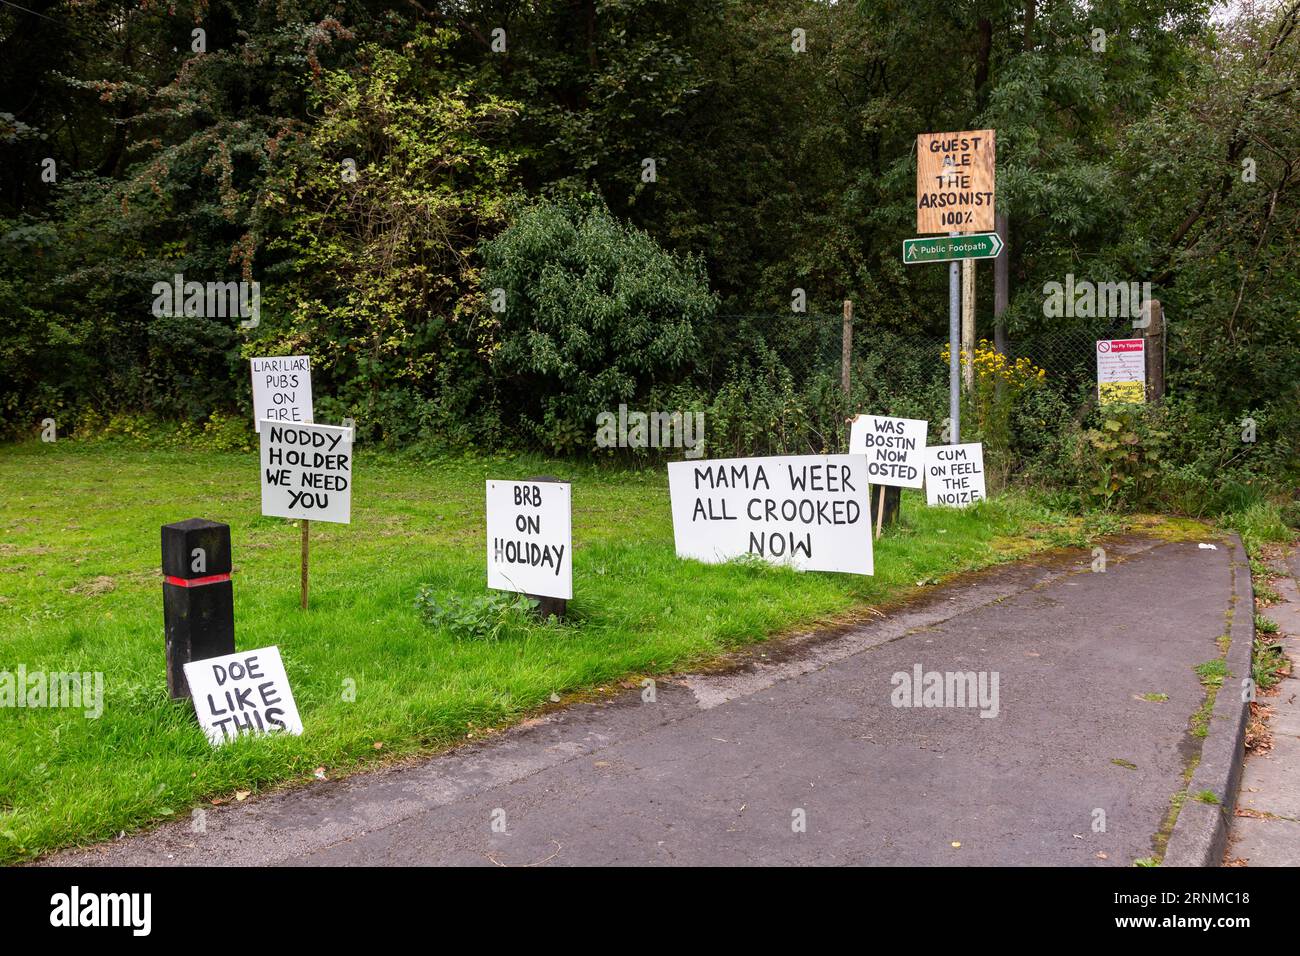 Himley, Staffordshire, UK. 2nd Sep, 2023. Four weeks after the famous Crooked House pub burned down, protest signs and the Black Country's flag are displayed in support of re-building the landmark building in the same location. Credit: Peter Lopeman/Alamy Live News Stock Photo